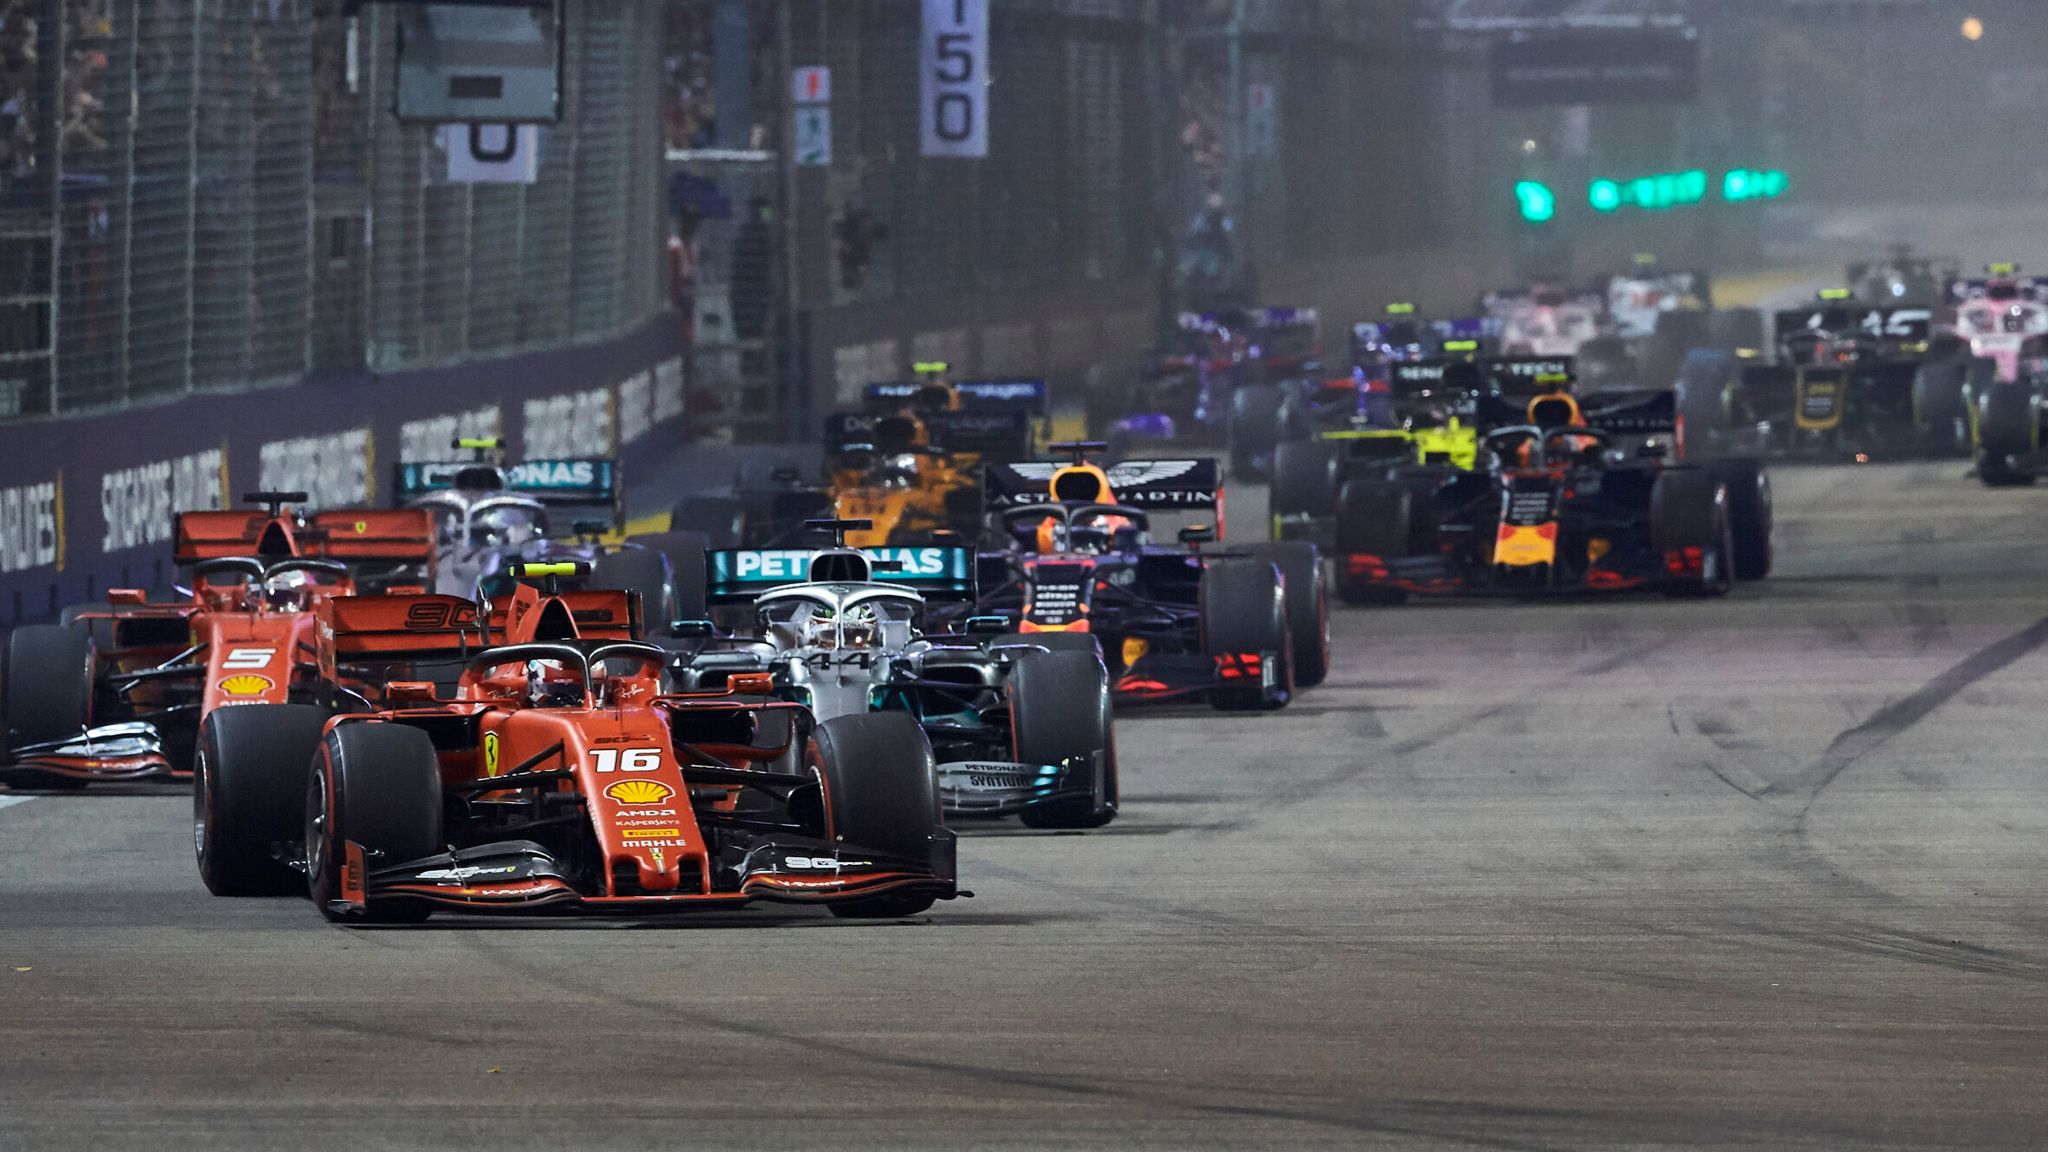 singapore gp cancelled for second year in a row due to covid 19 restrictions with alternative options on table f1 news